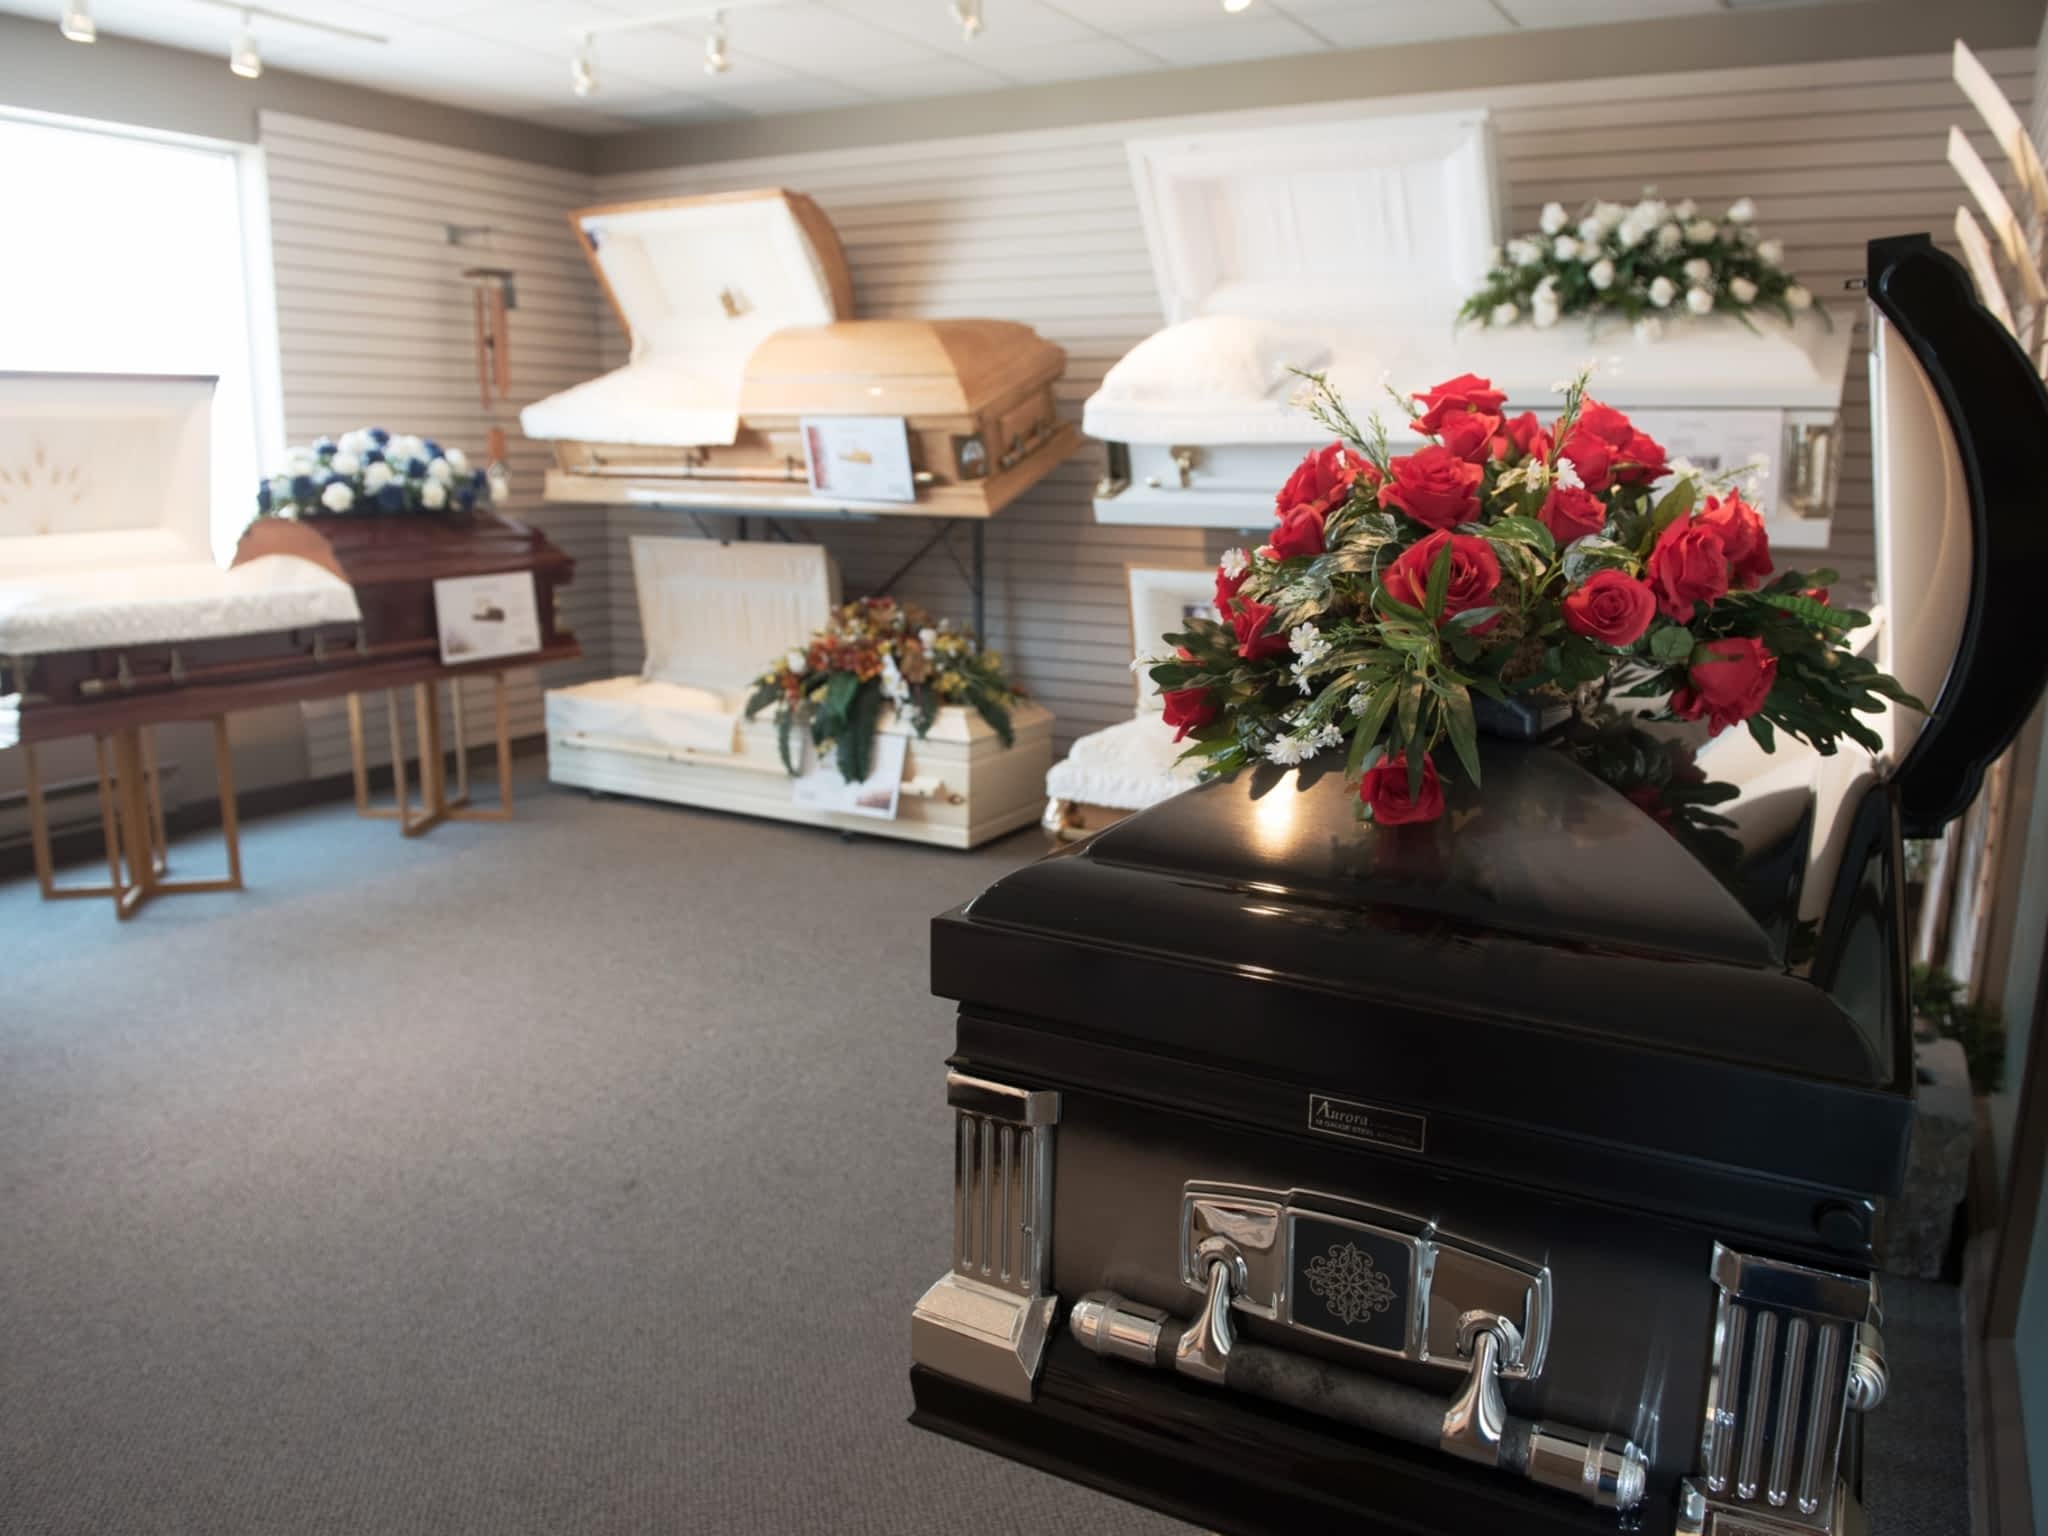 Cesar funeral home